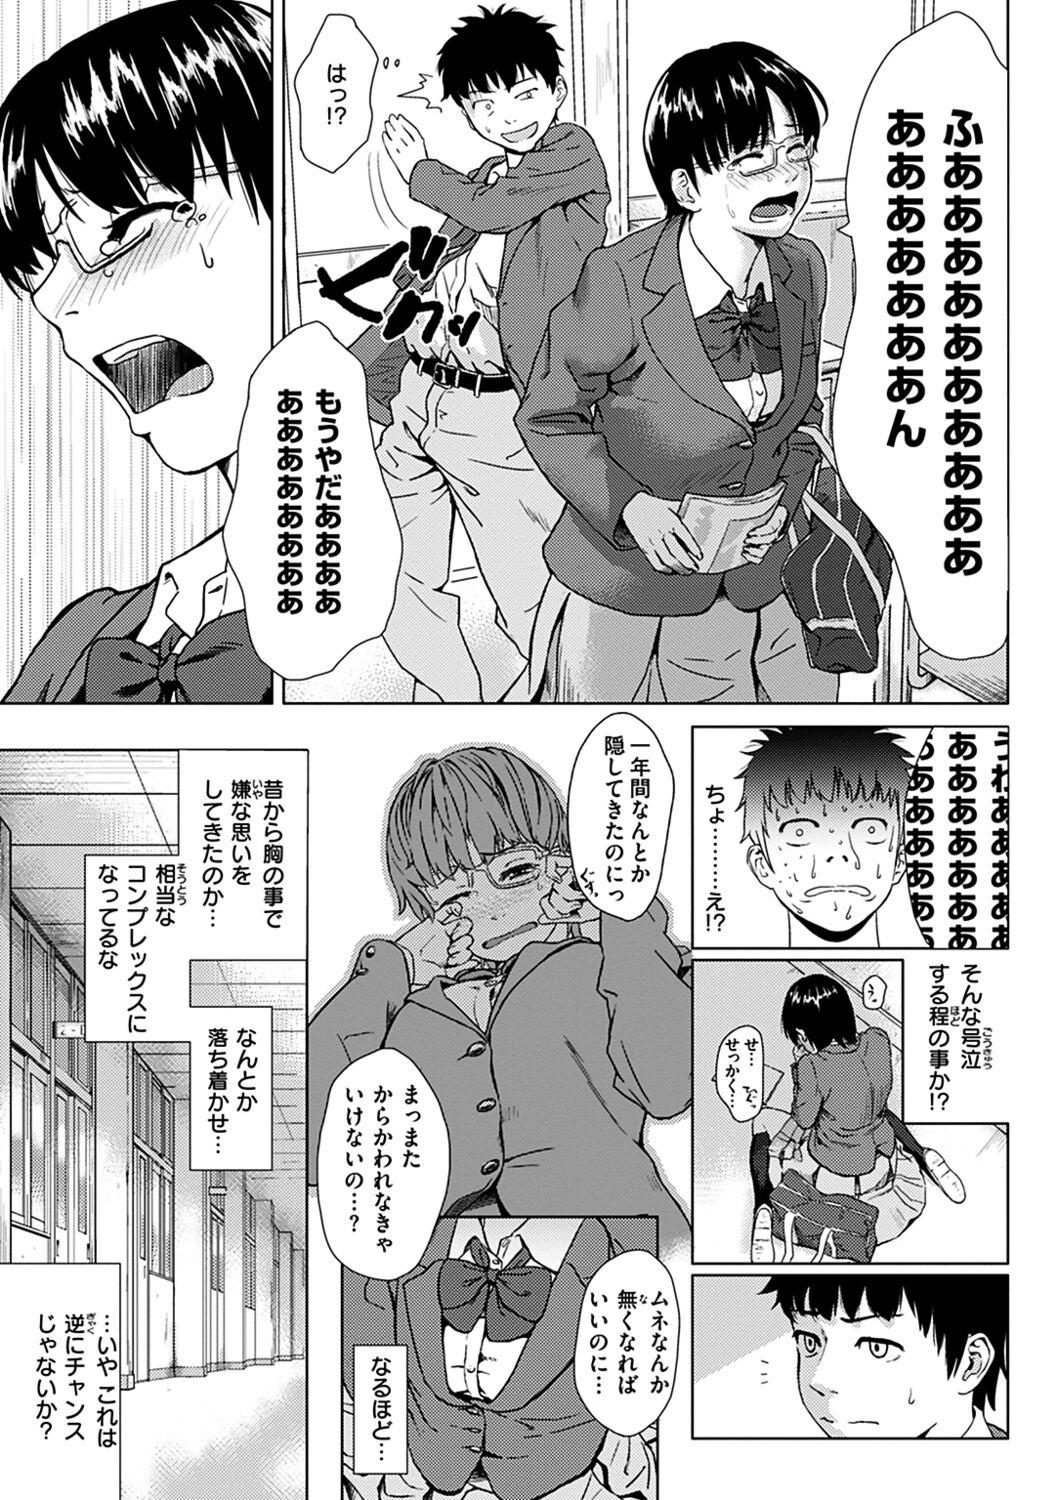 Speculum Kimi dake ni - I Only Love You... Ginger - Page 11